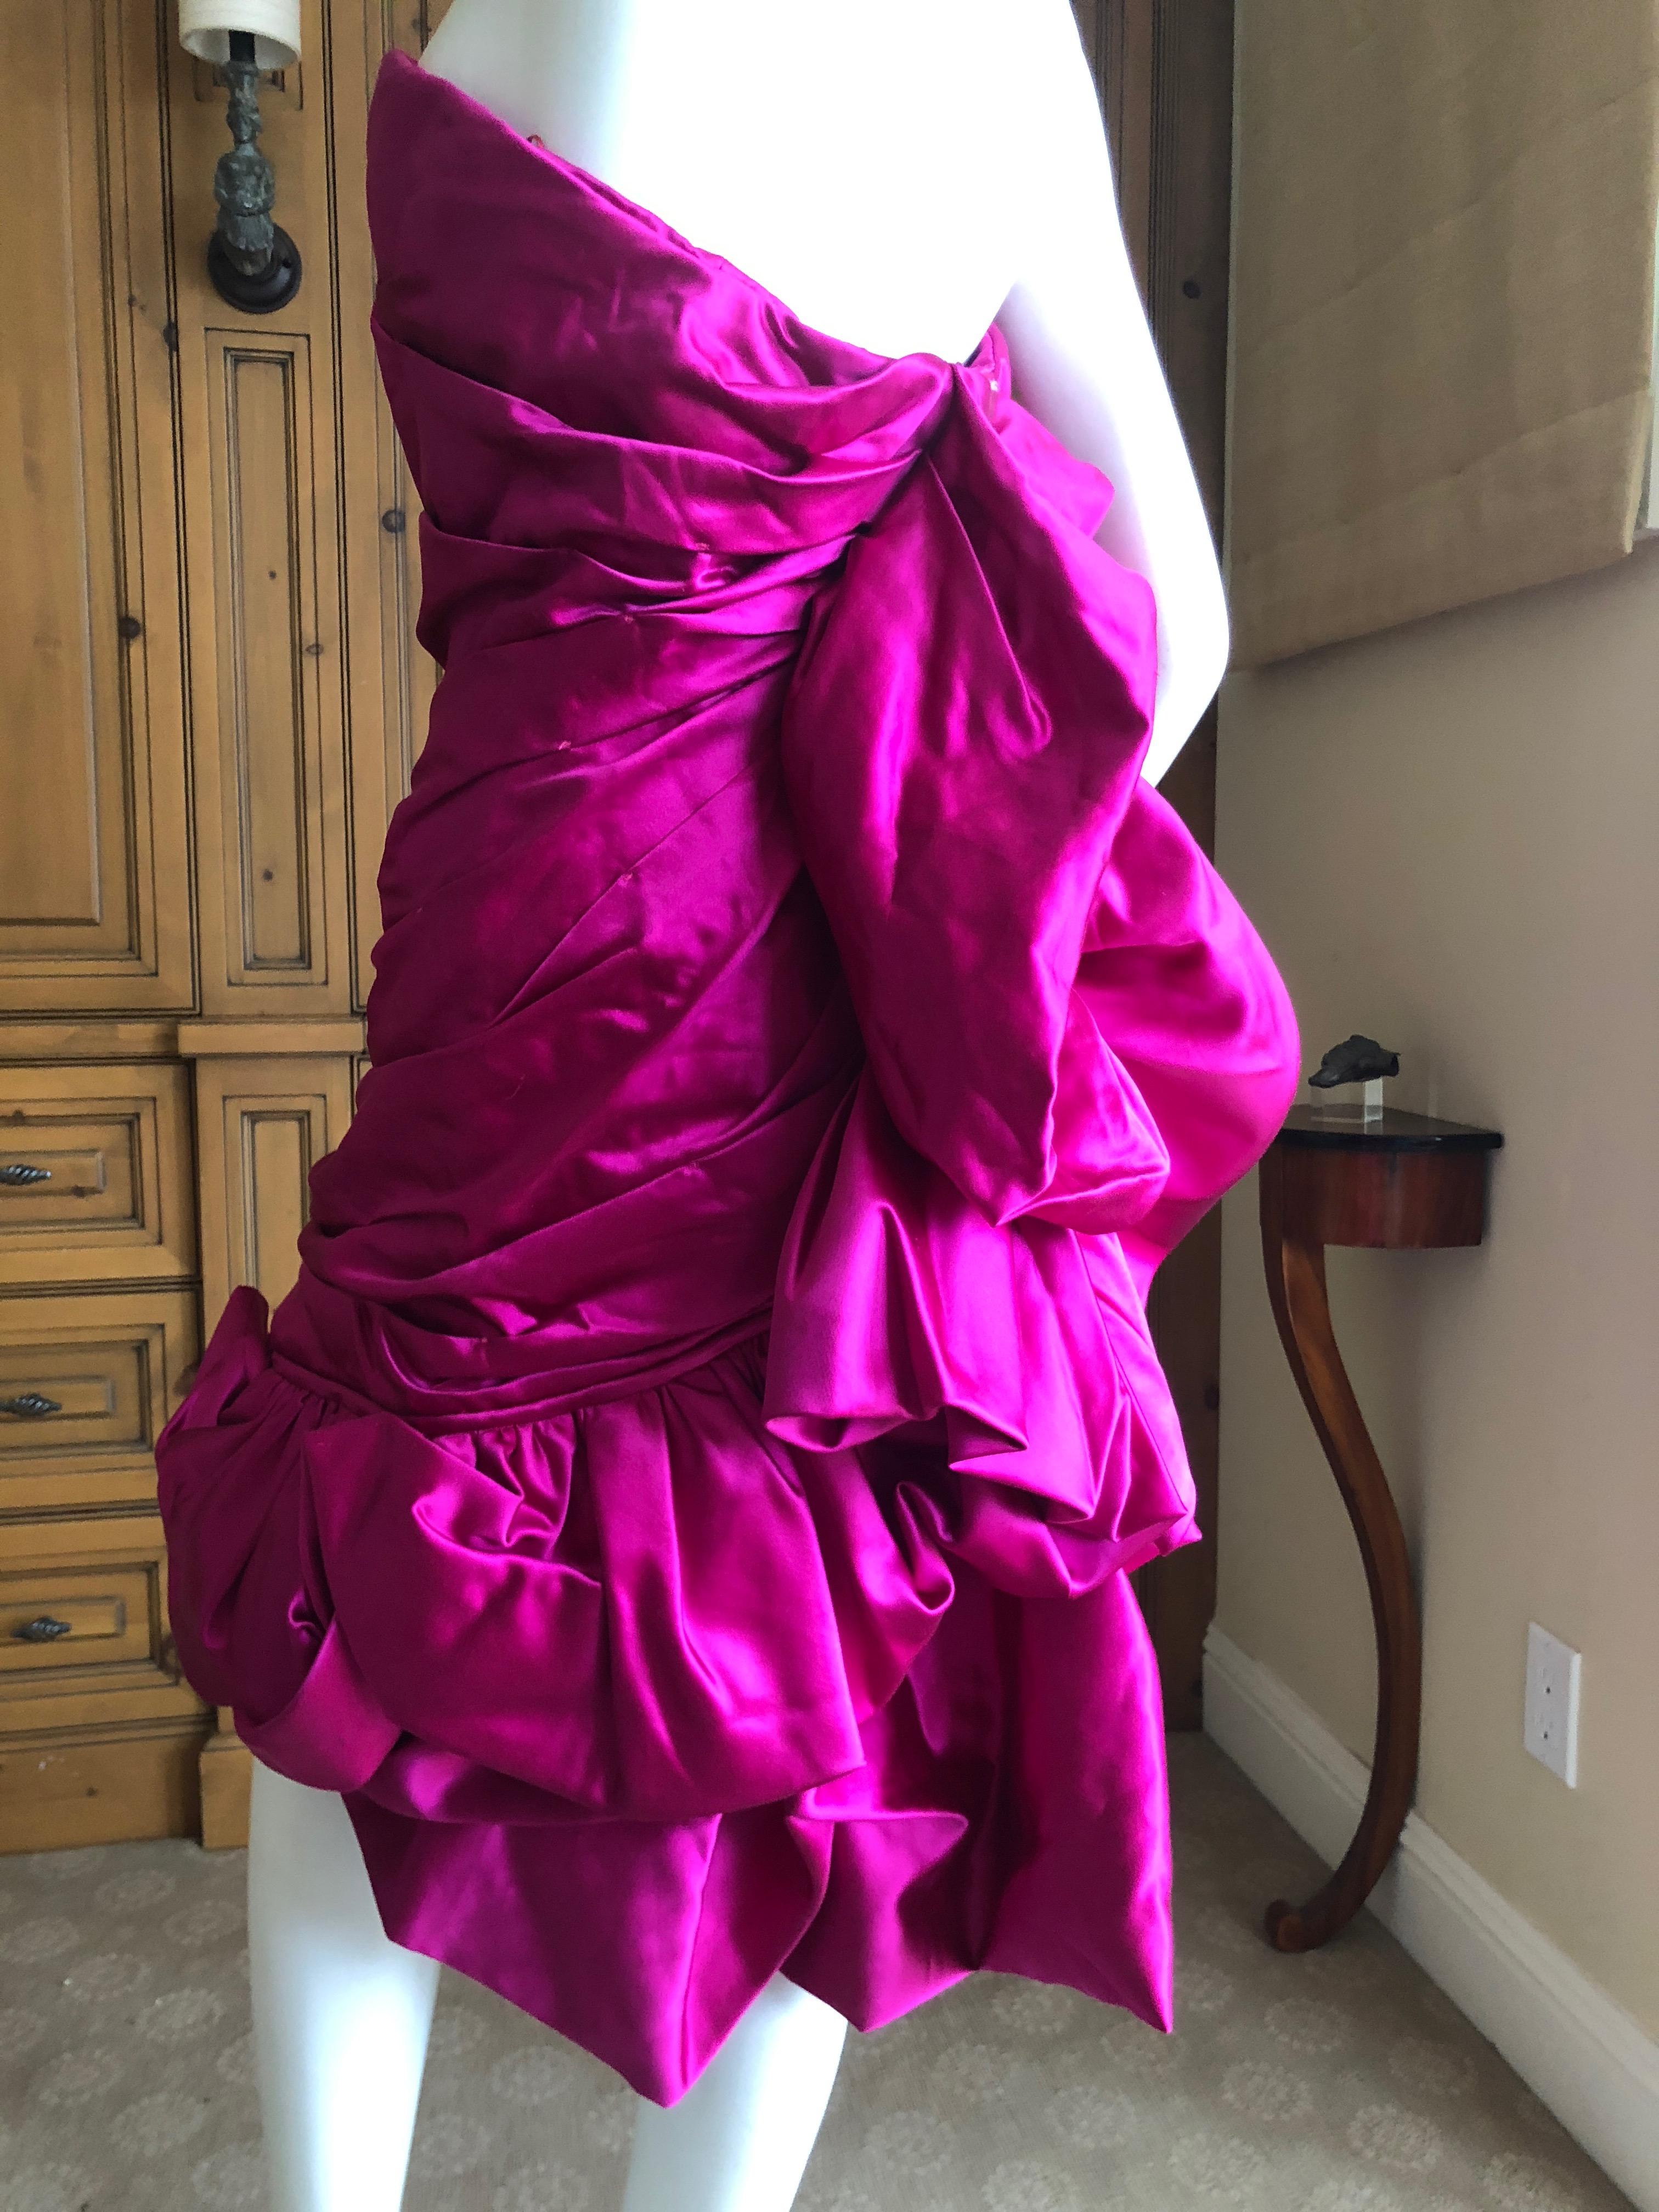 Christian Lacroix Vintage 1980's Raspberry Silk Corseted Pouf Dress New w Tags
This is so pretty, but is a little heavy, there is a lot of fabric for such a little dress
Size 40
Bust 36